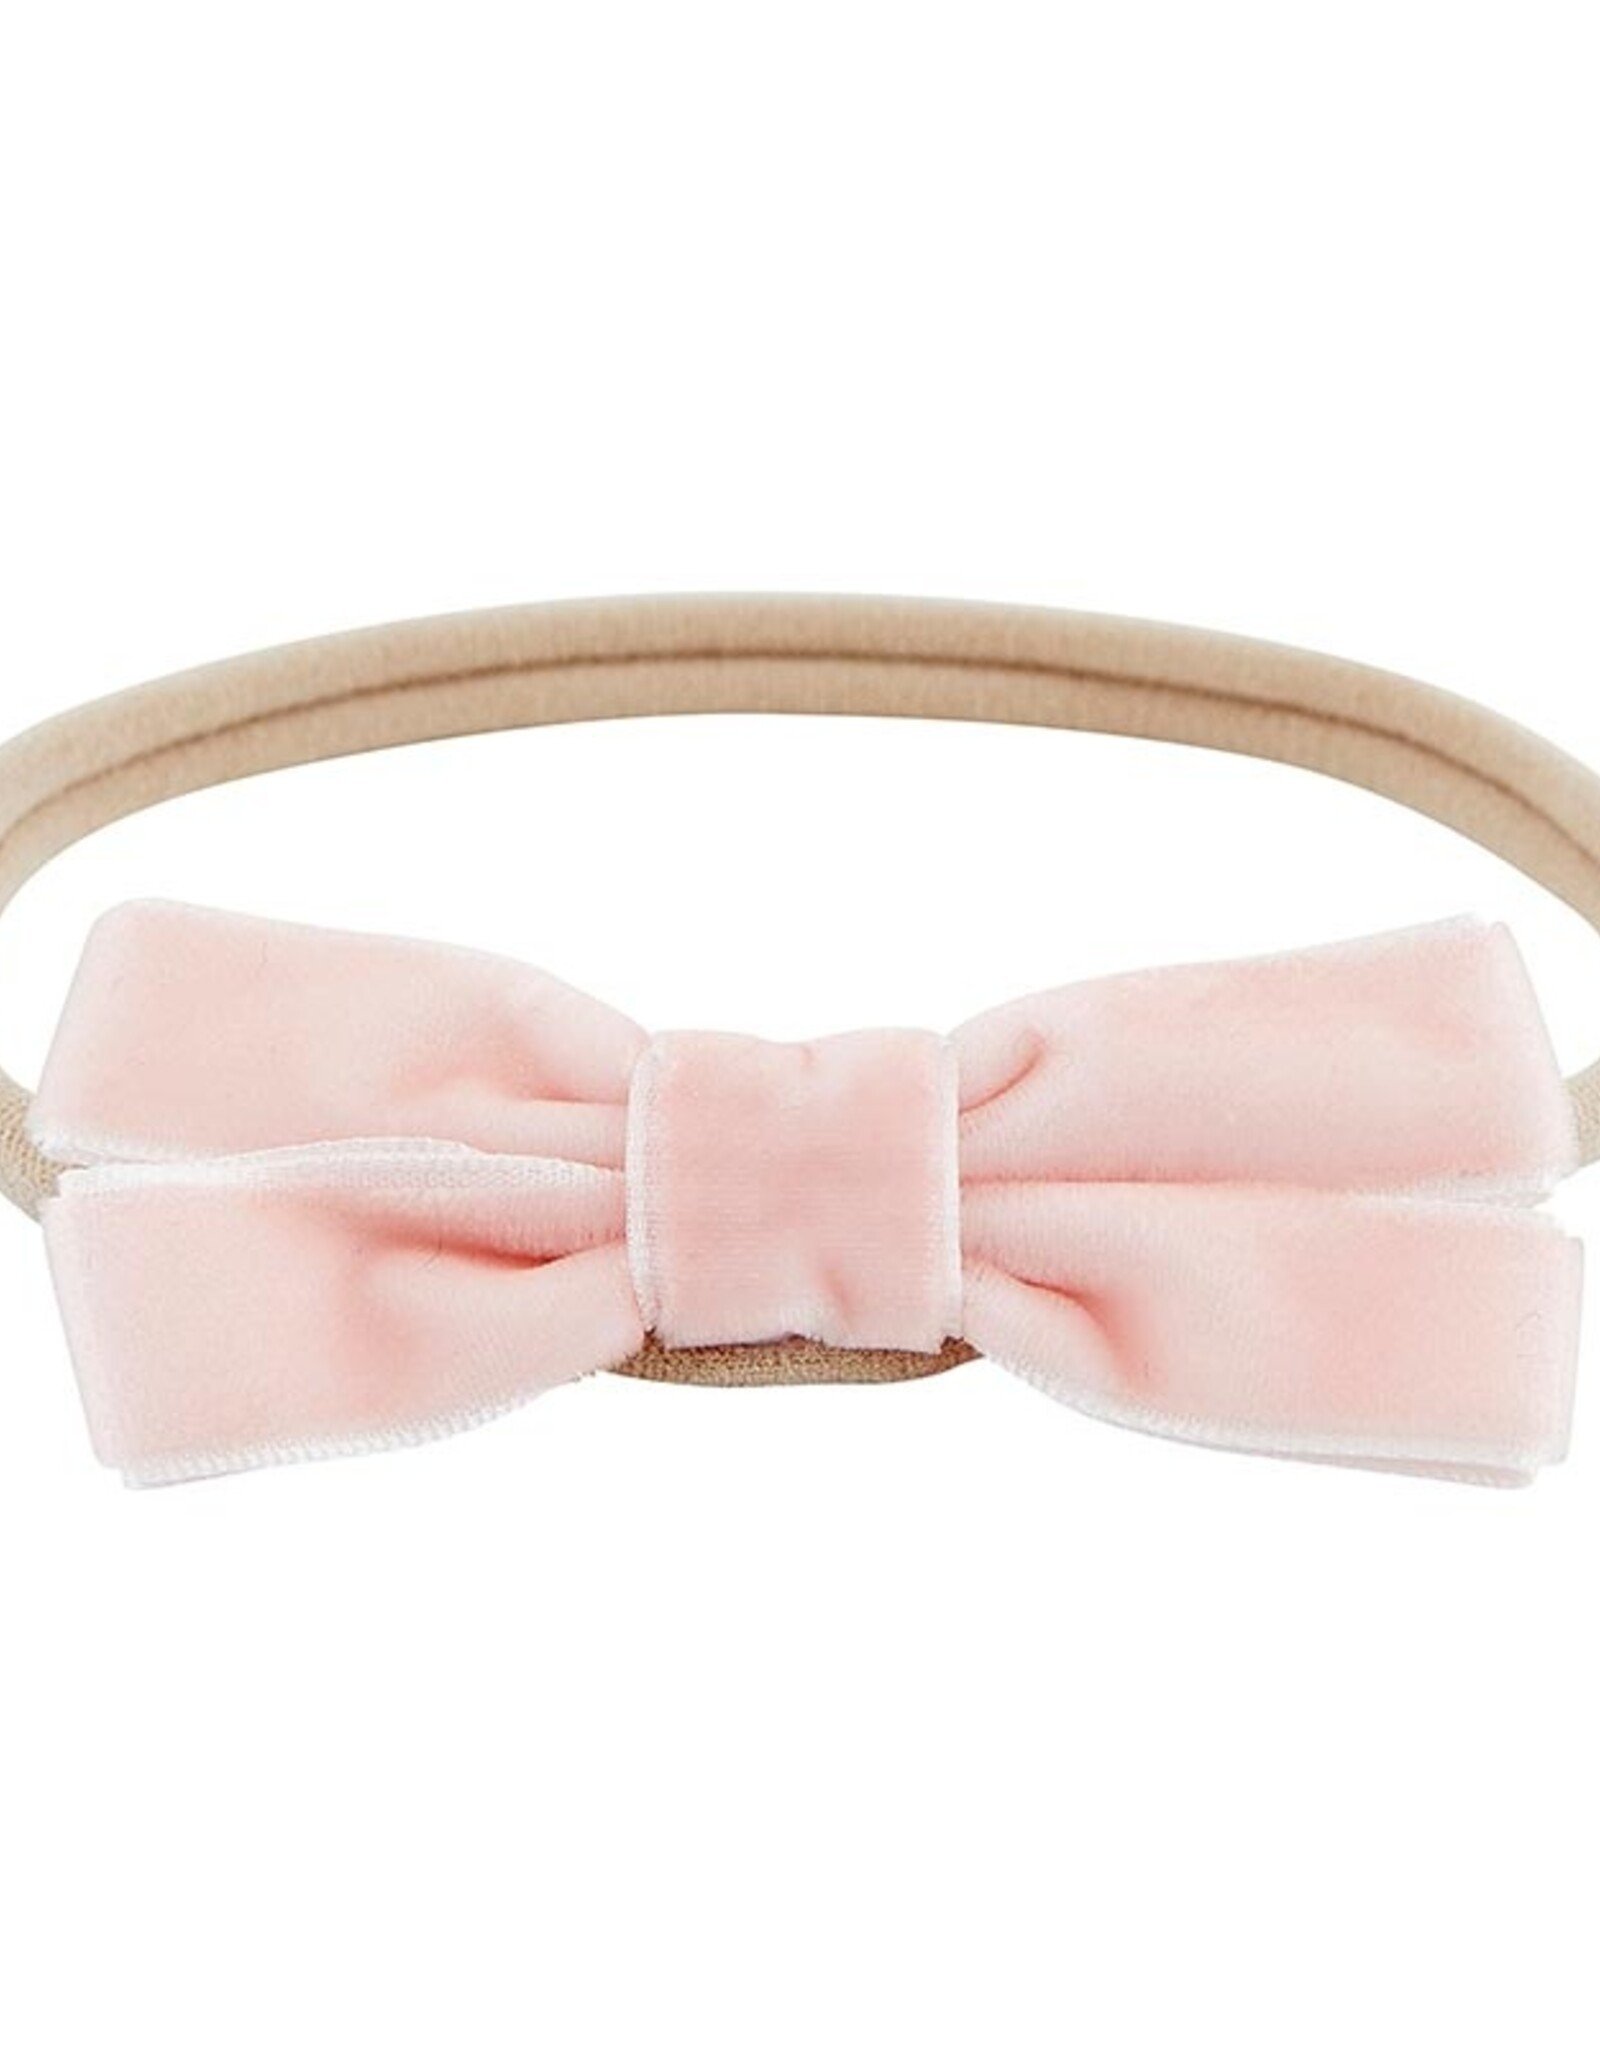 Stephan Baby Red and Pink Bow Headband Set